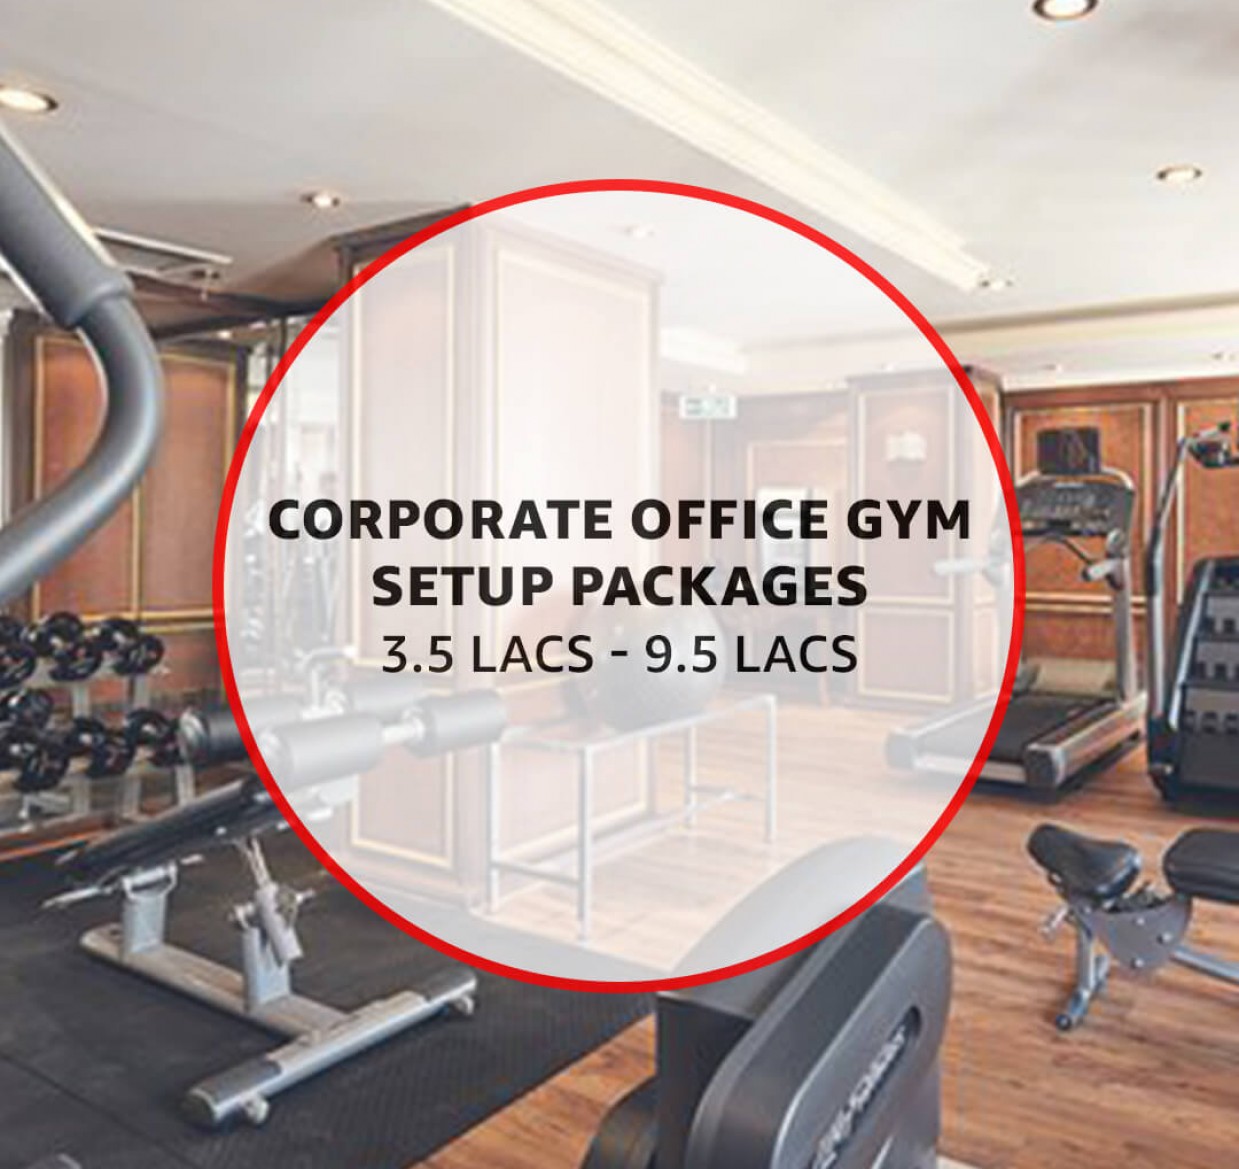 Corporate Office Gym Packages